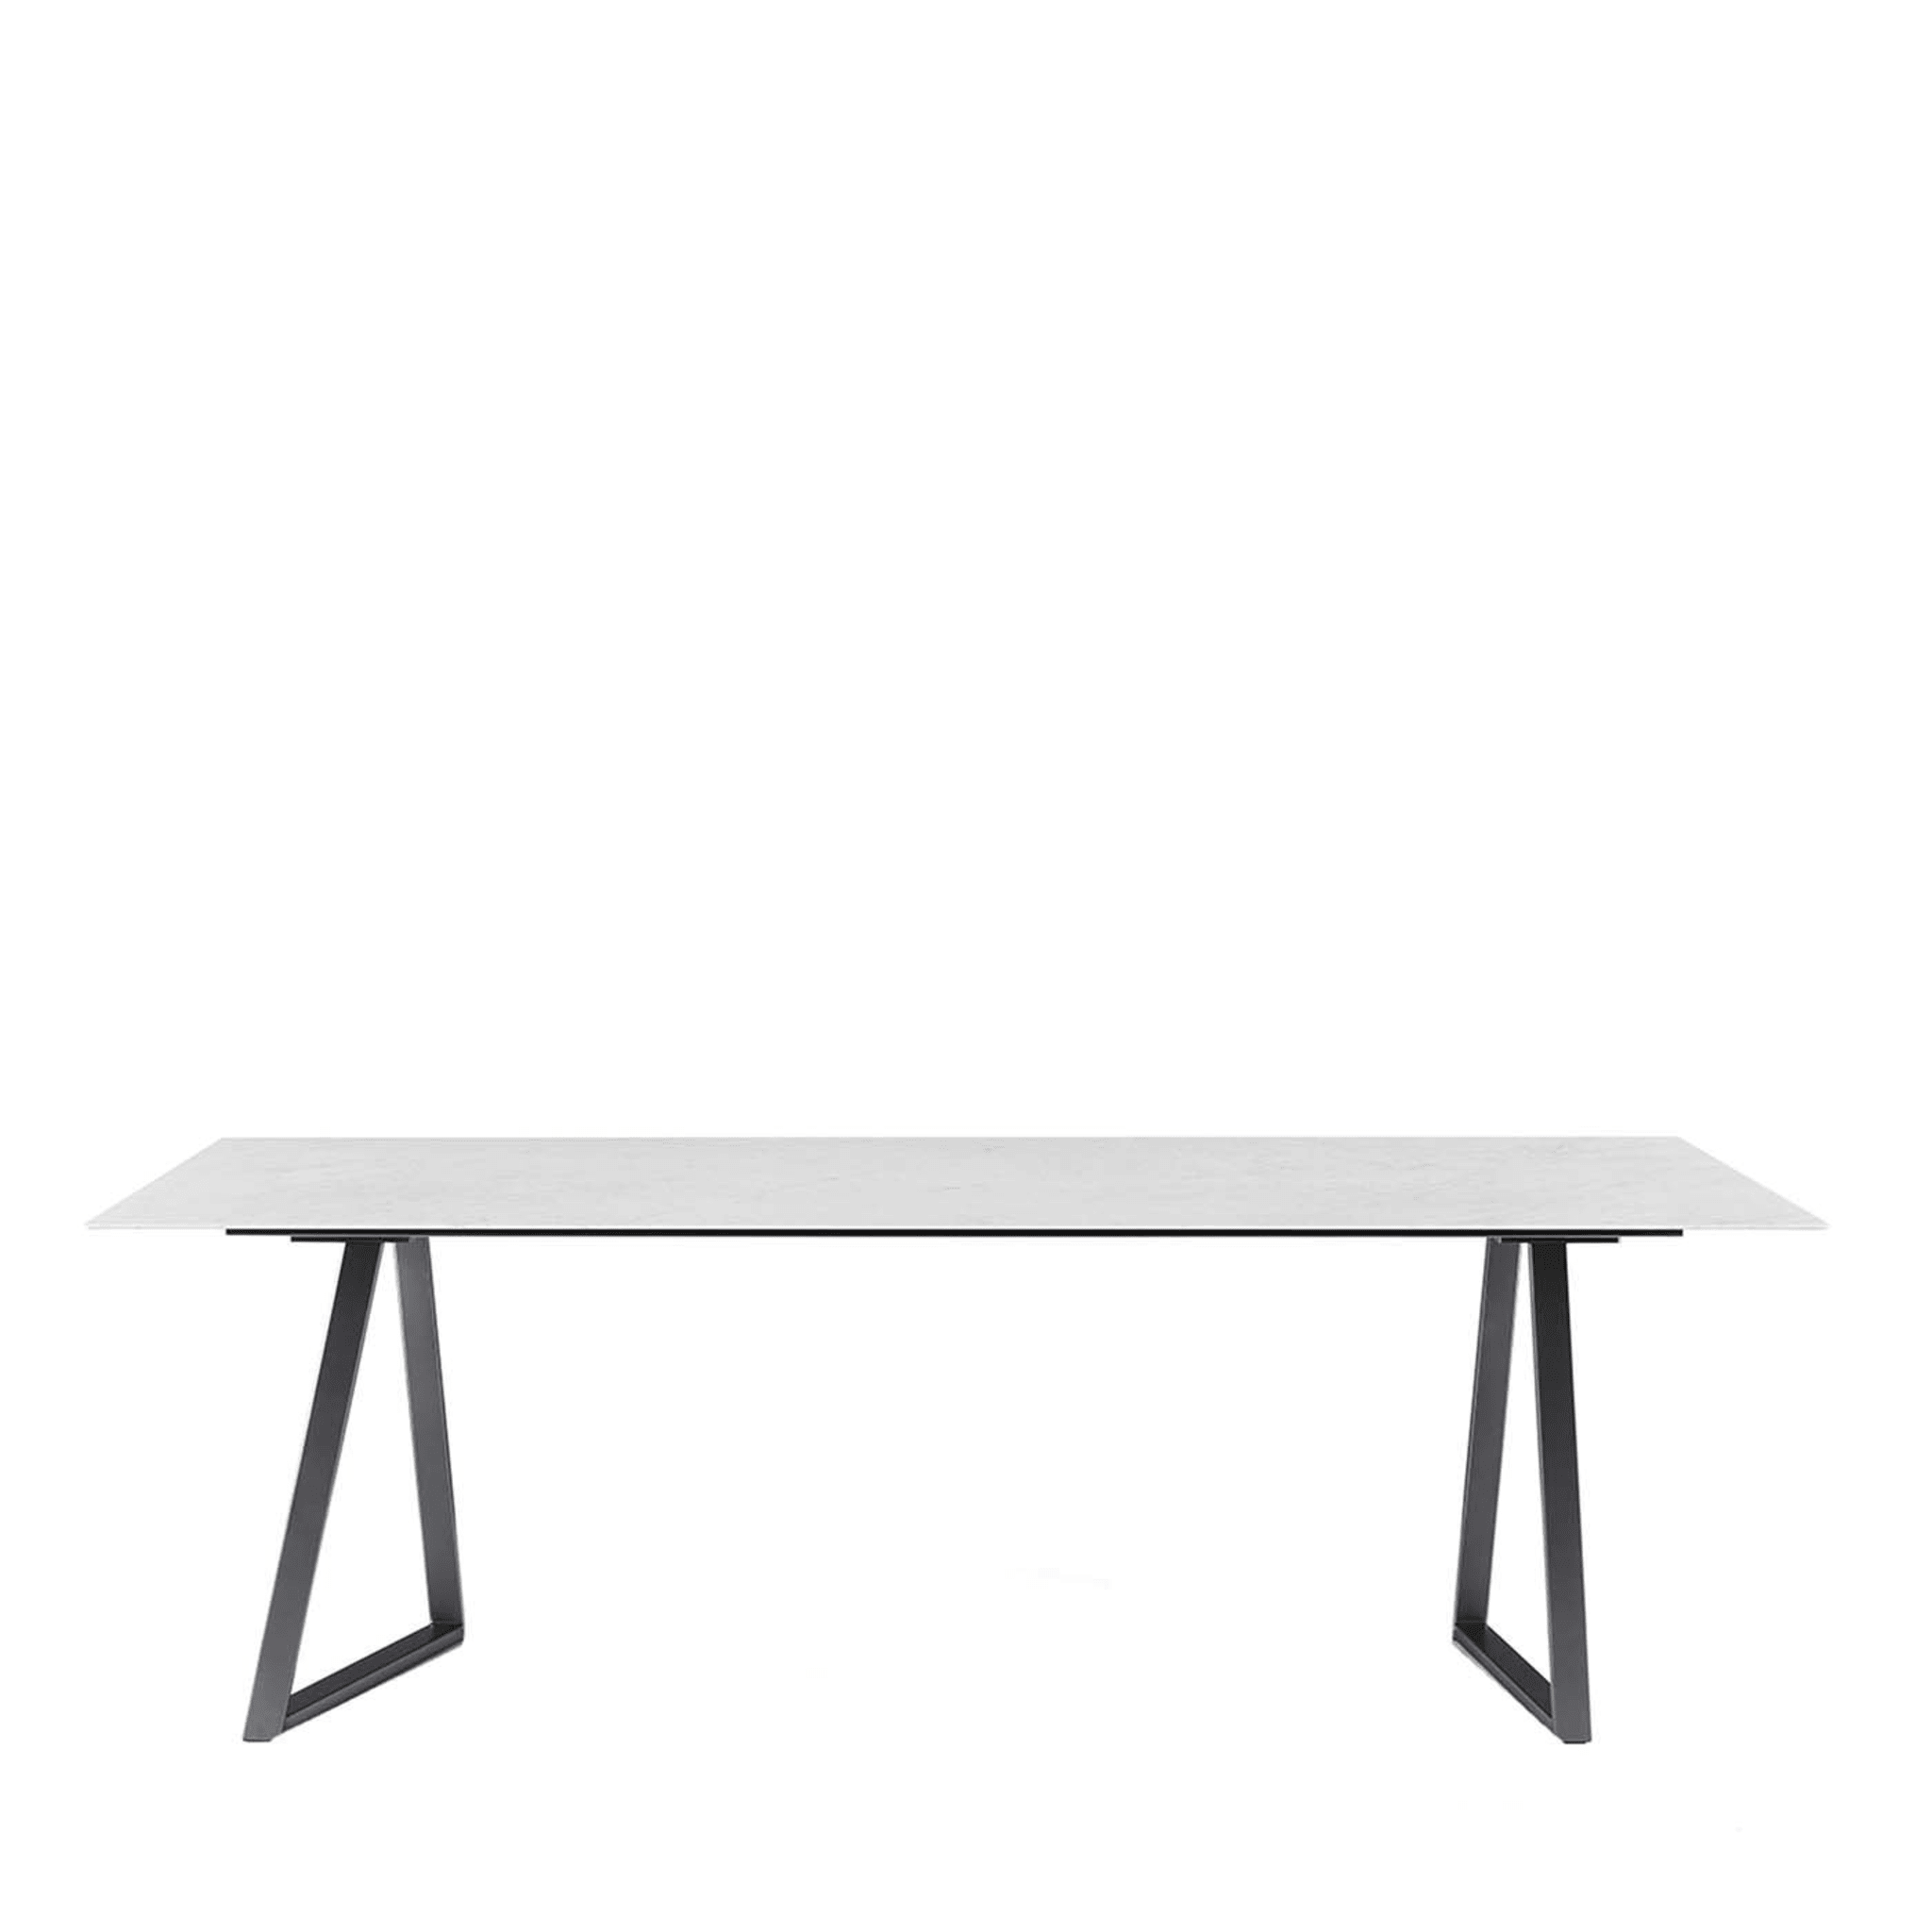 Dritto Rectangular Dining Table by Piero Lissoni - Main view